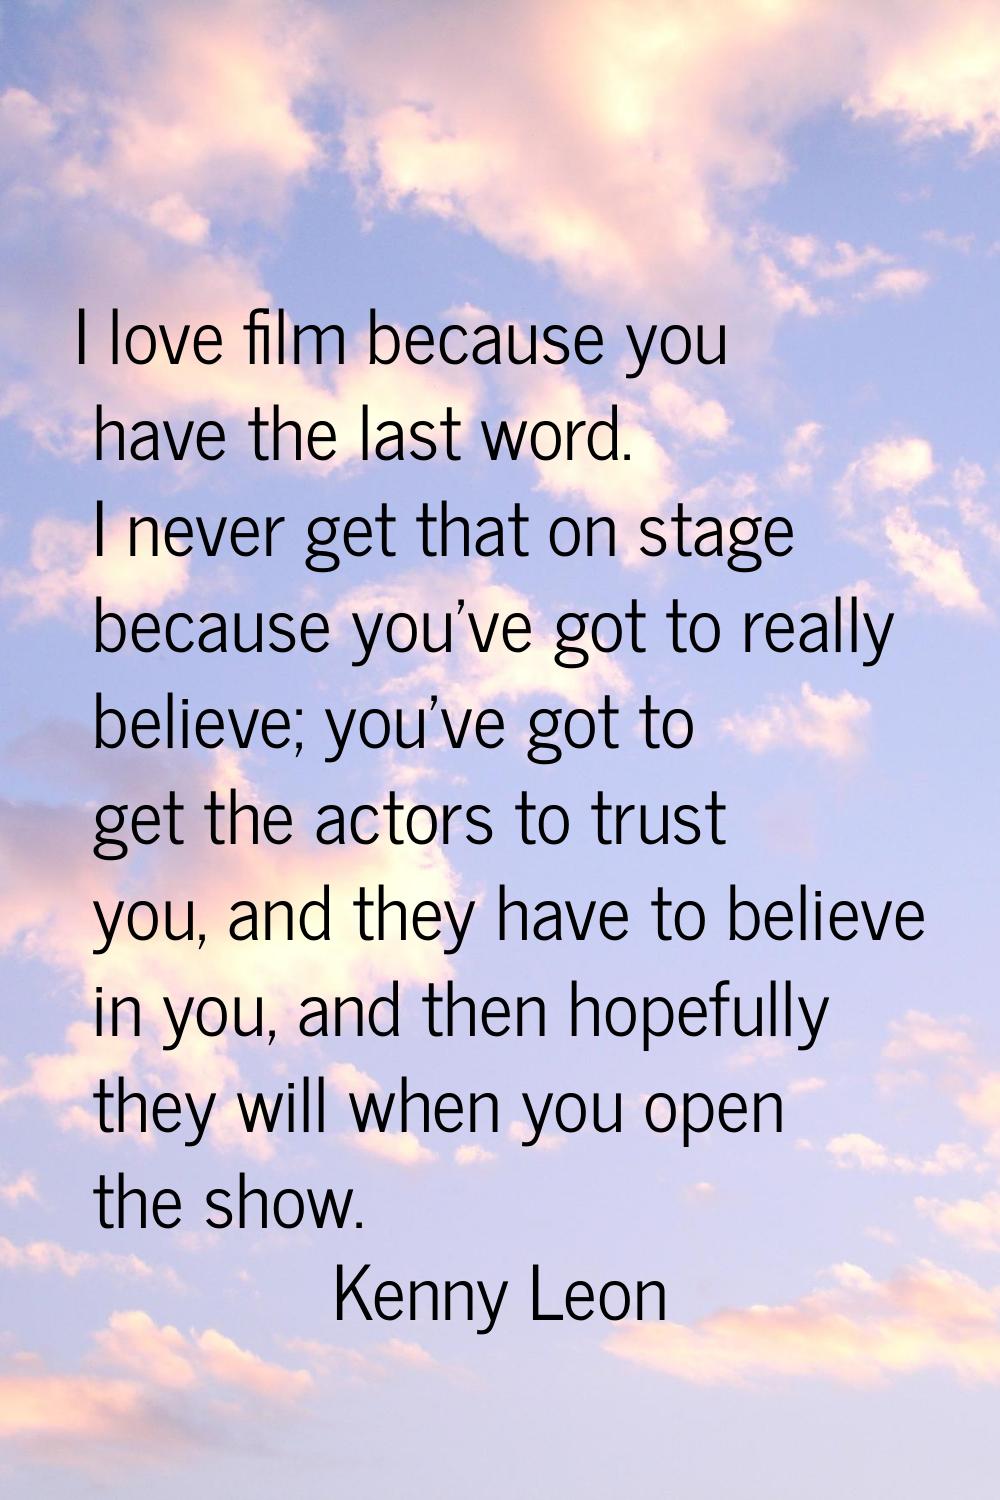 I love film because you have the last word. I never get that on stage because you've got to really 